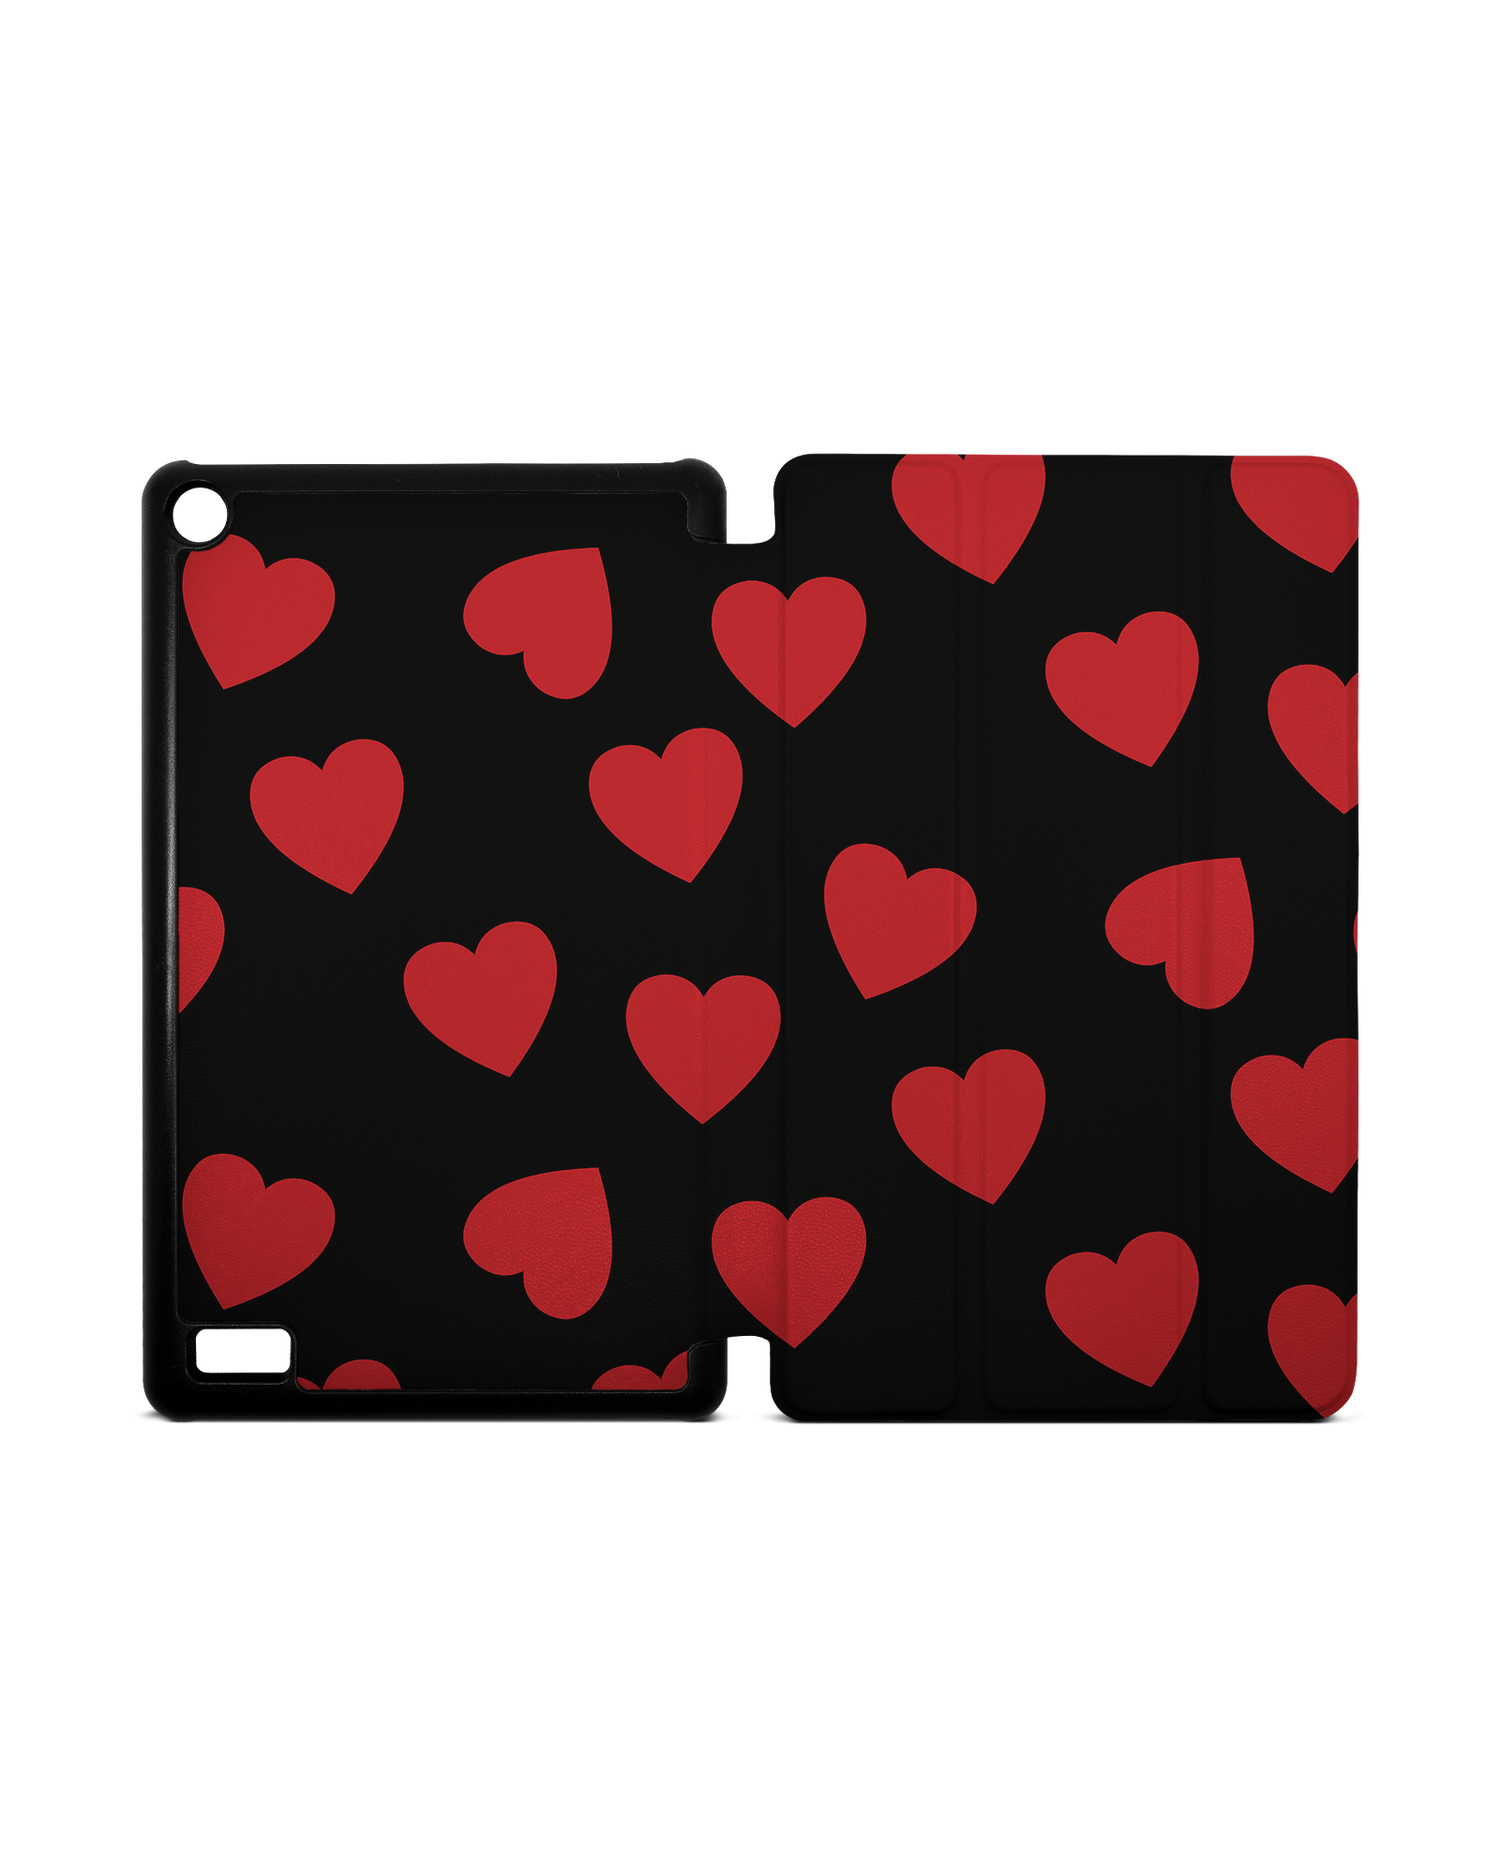 Repeating Hearts Tablet Smart Case for Amazon Fire 7: Opened